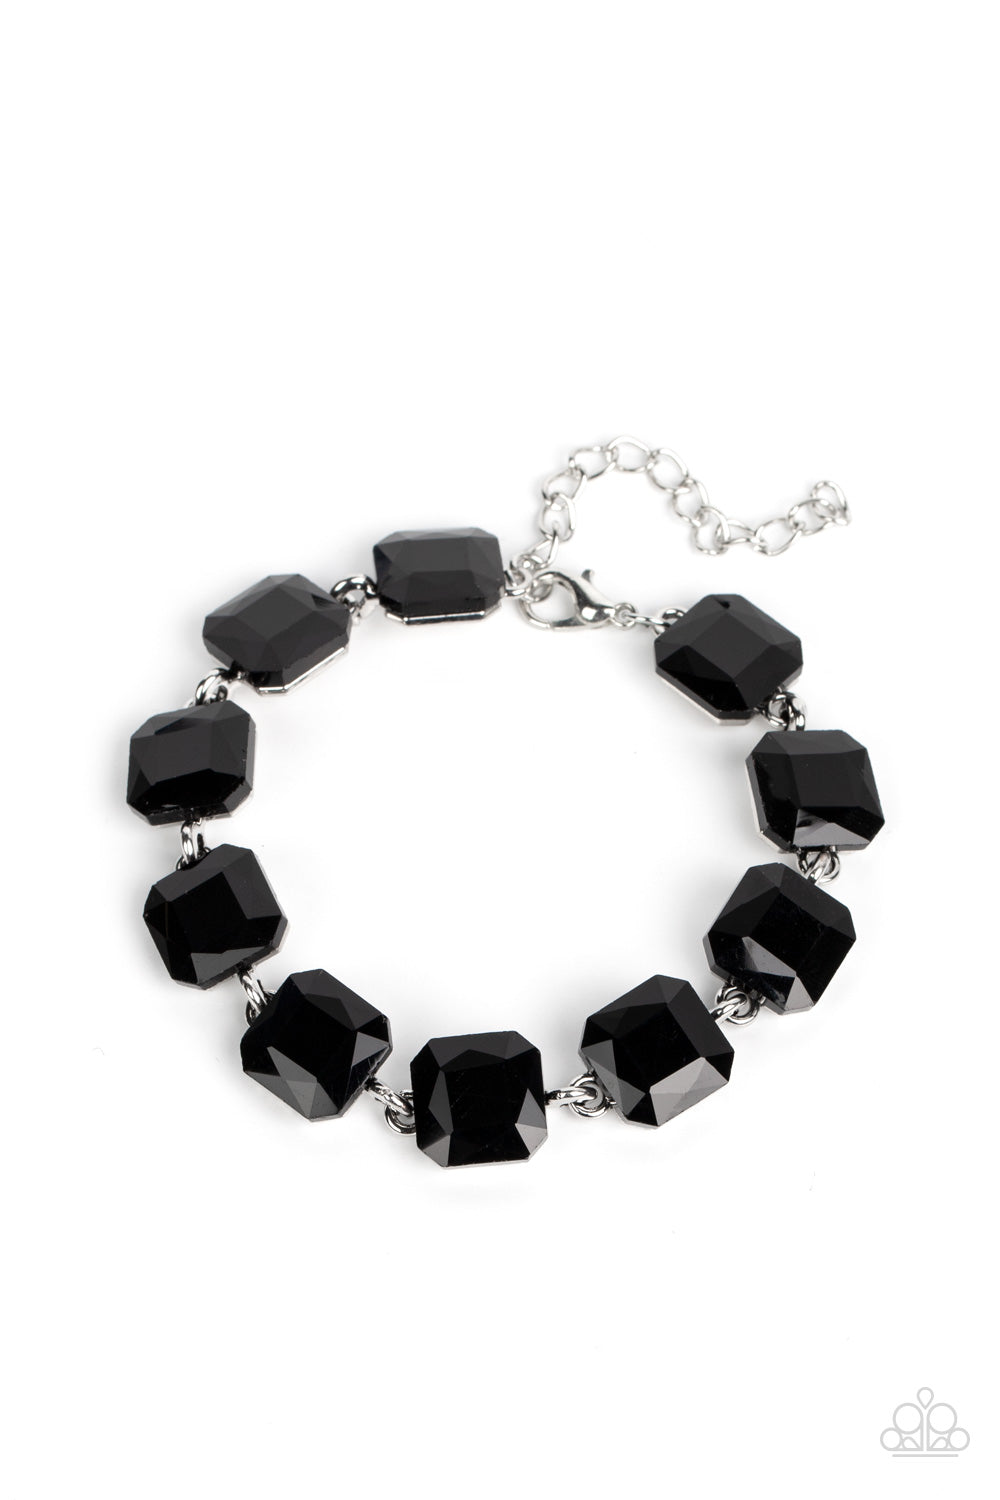 Mind-Blowing Bling - Black Rhinestone and Silver Bracelet  - Paparazzi Accessories - Featuring radiant cuts, glittery black rhinestones sit atop silver frames as they delicately link around the wrist for a mind-blowing brilliance. Features an adjustable clasp closure.